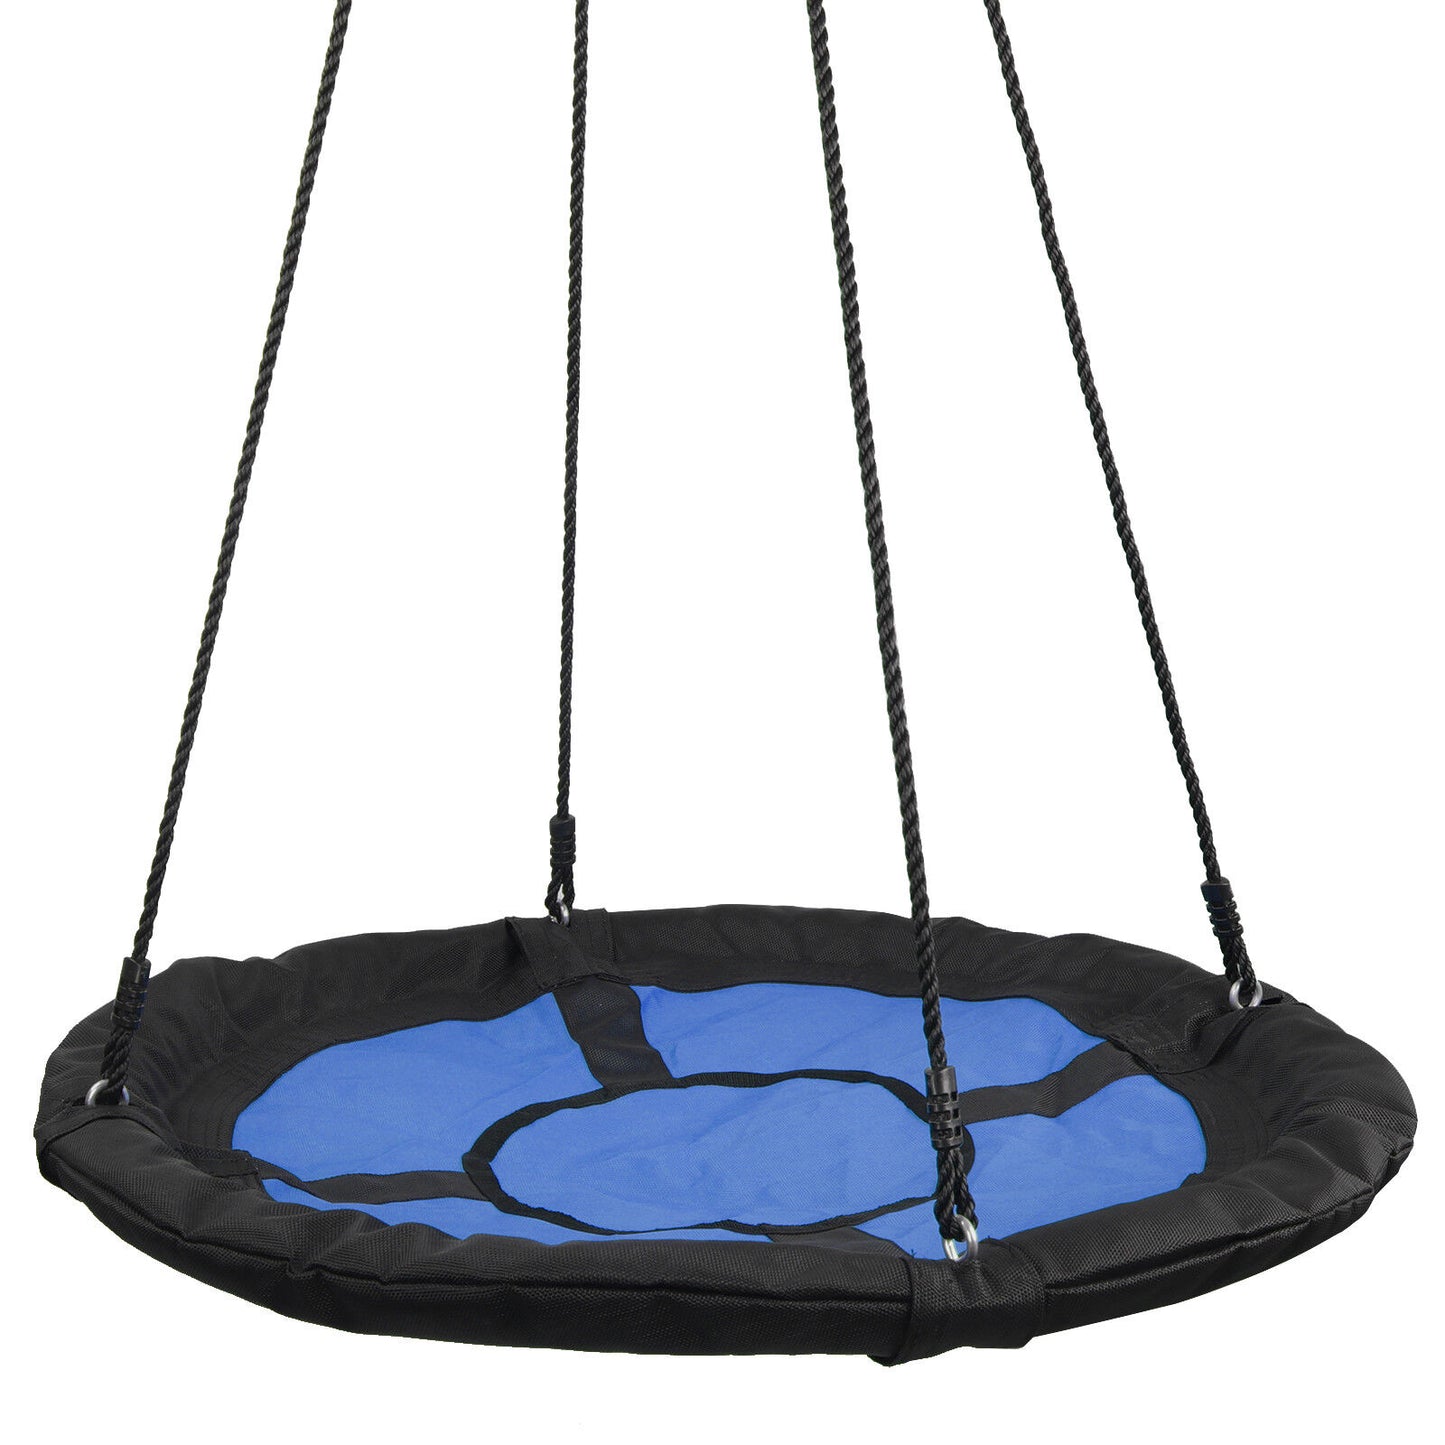 Powder-Coat 72" All-Steel All Weather Stand + 40" KidsTree Swing Saucer Swing